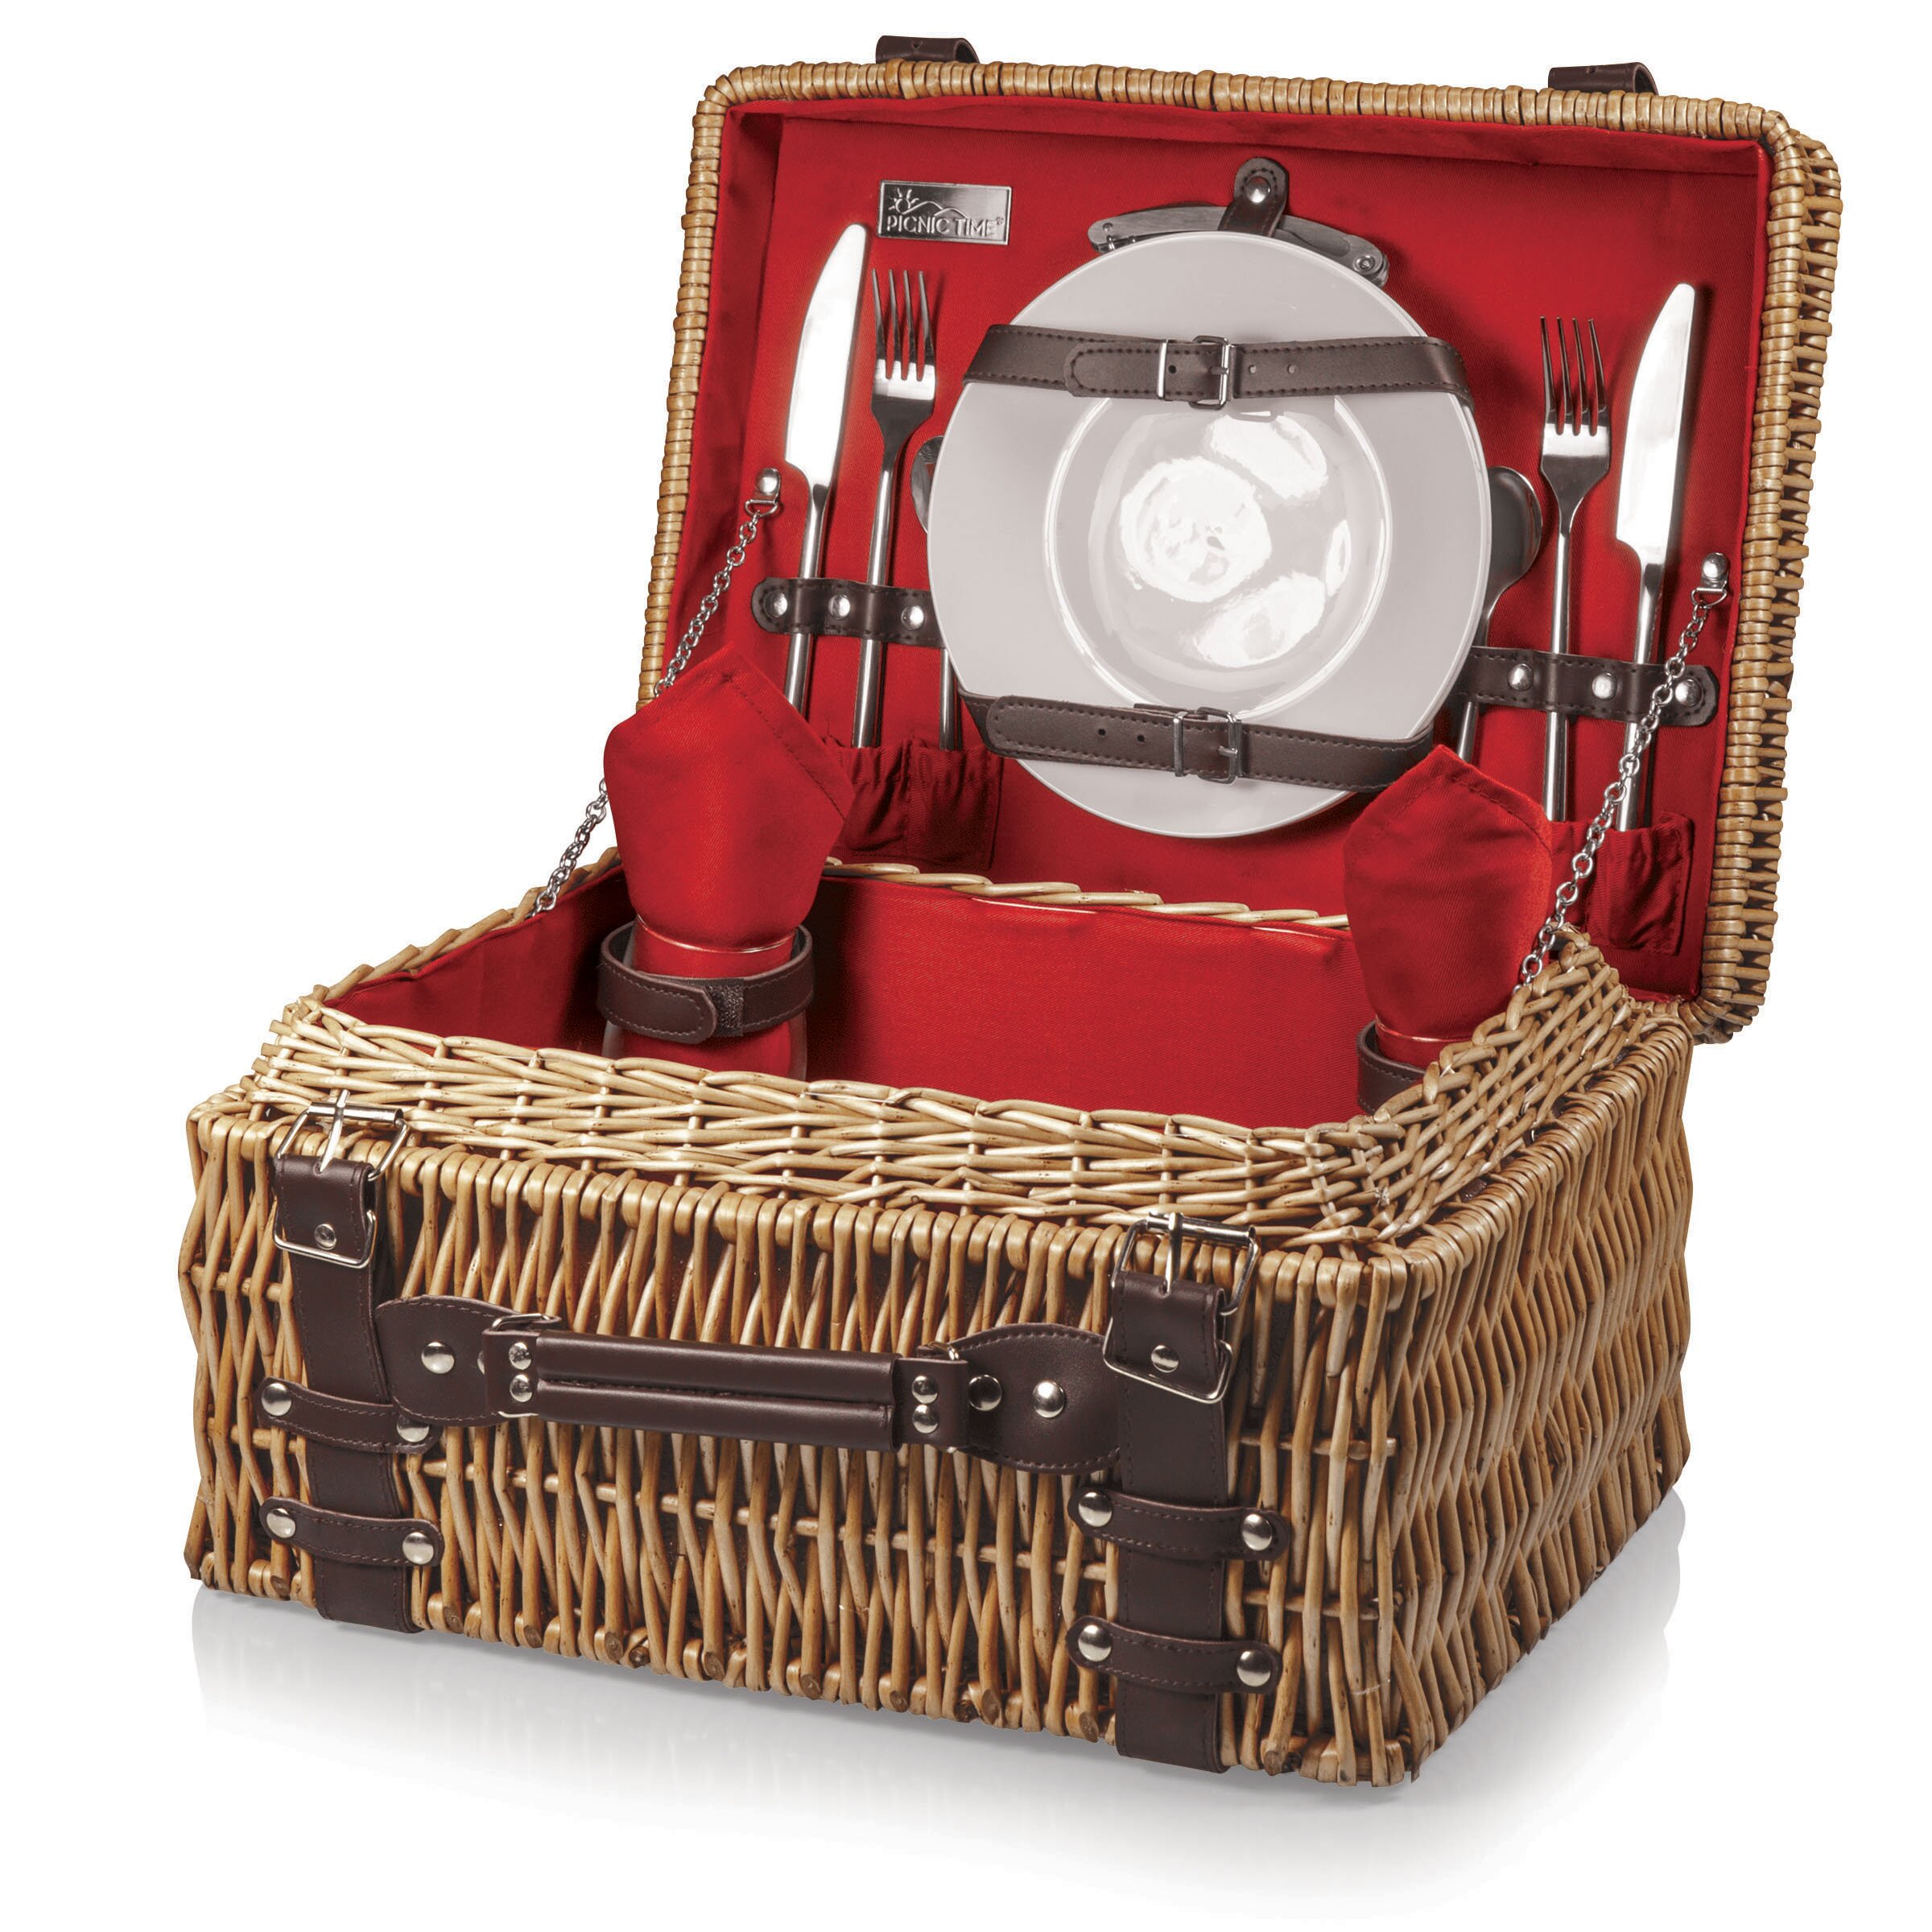 How do you find picnic baskets on sale?